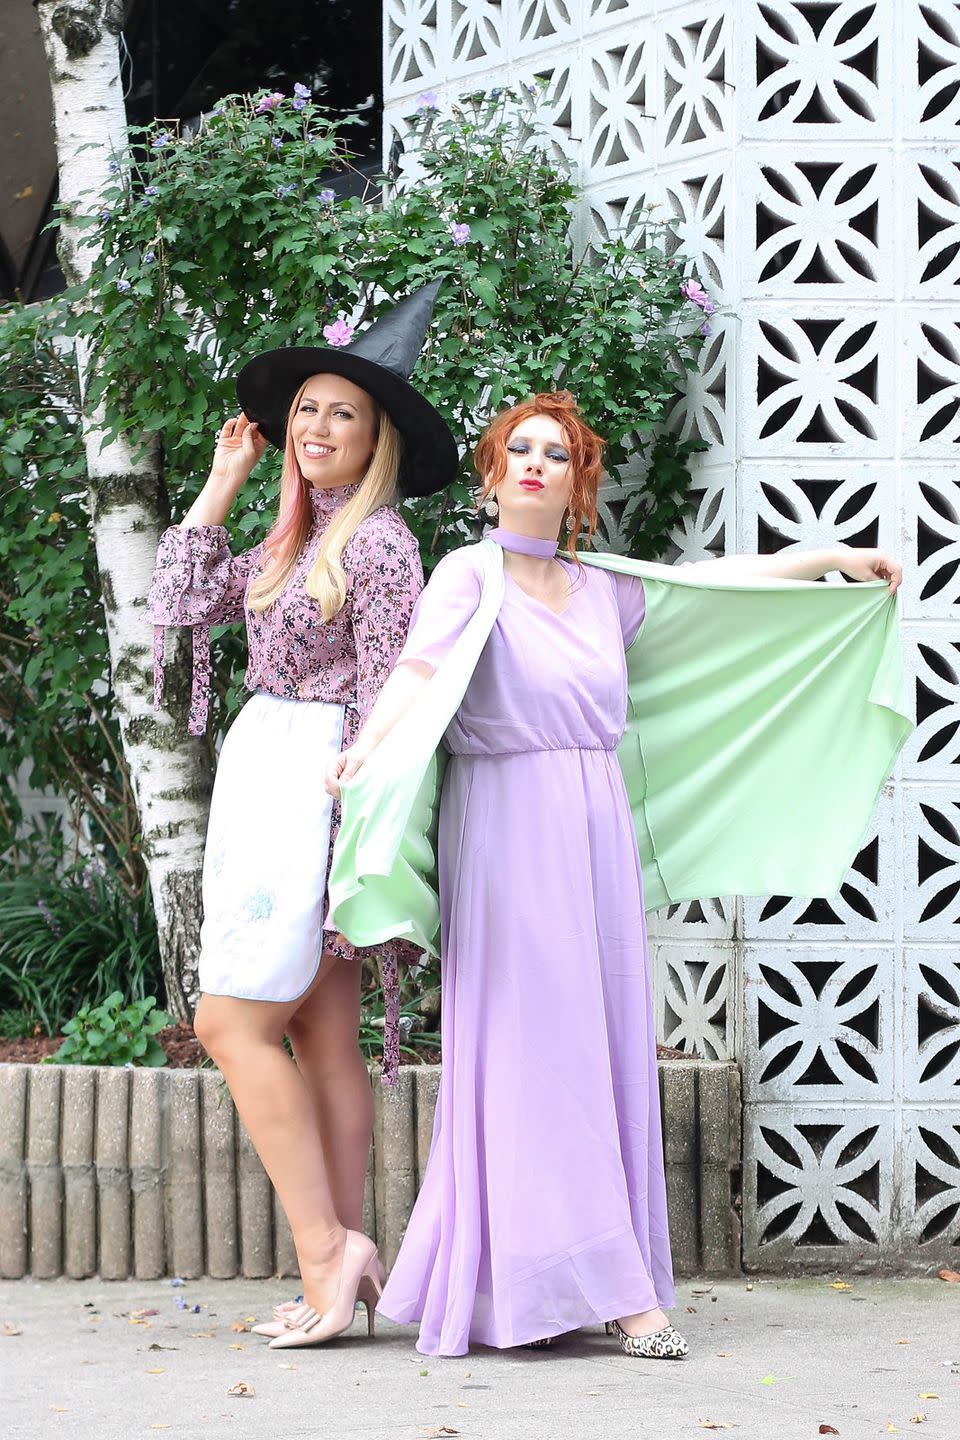 Samantha and Endora from 'Bewitched' Costumes